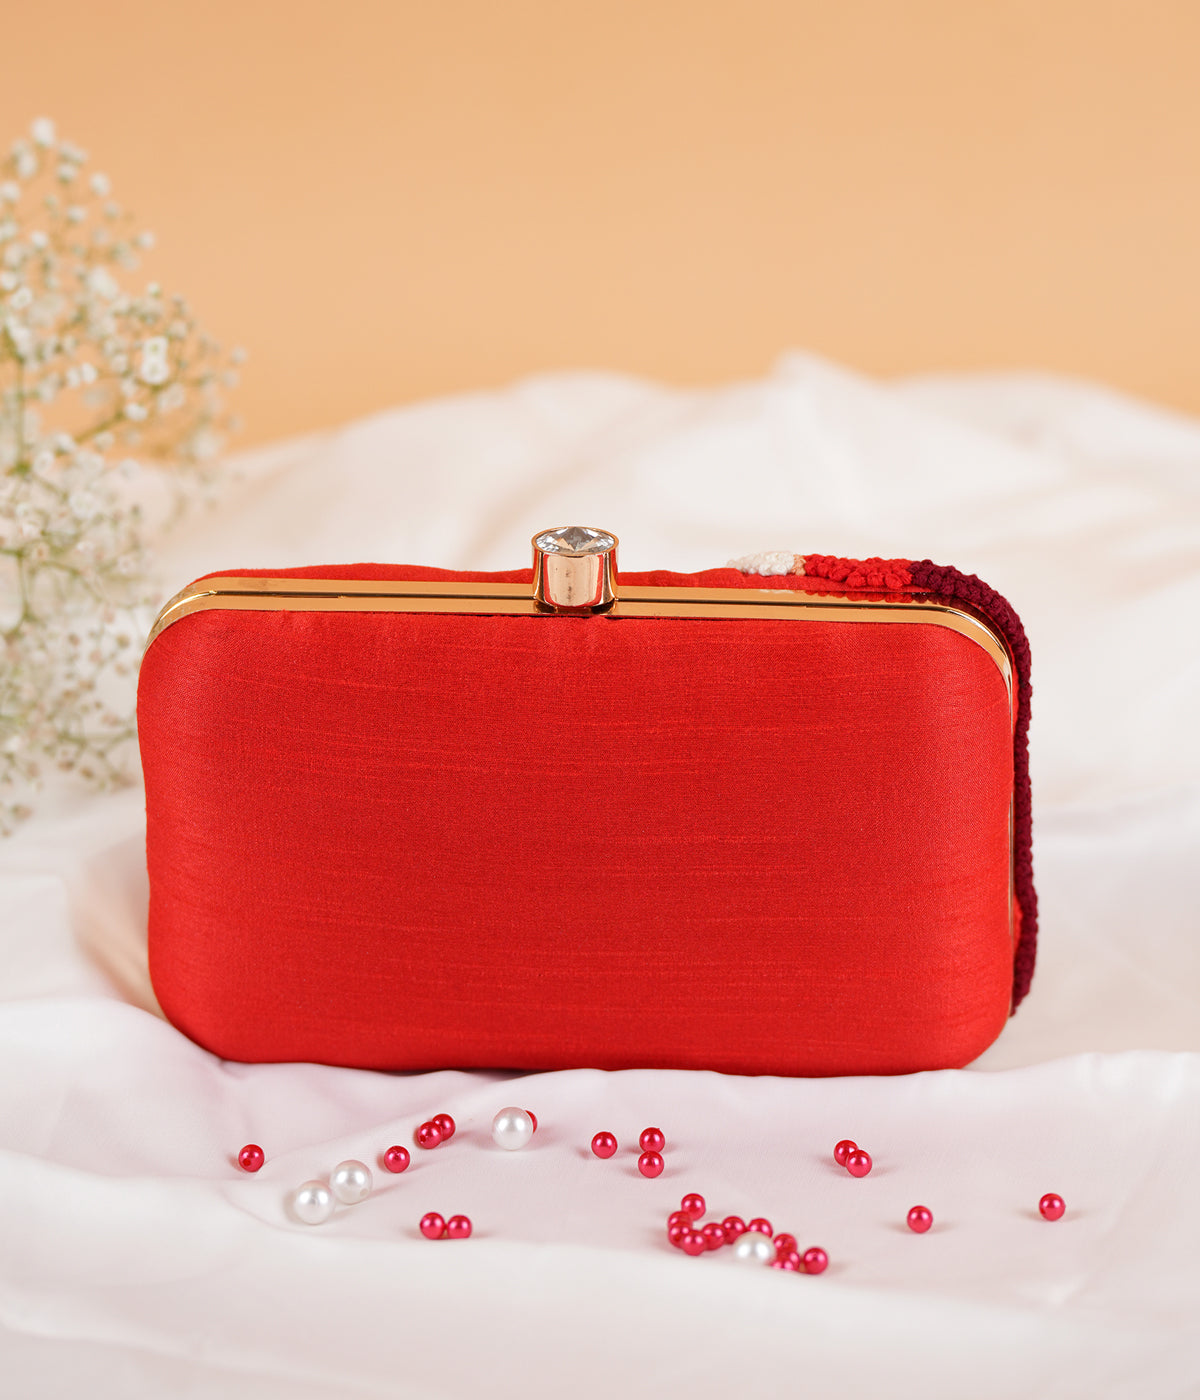 WAVES OF RED CLUTCH BAG